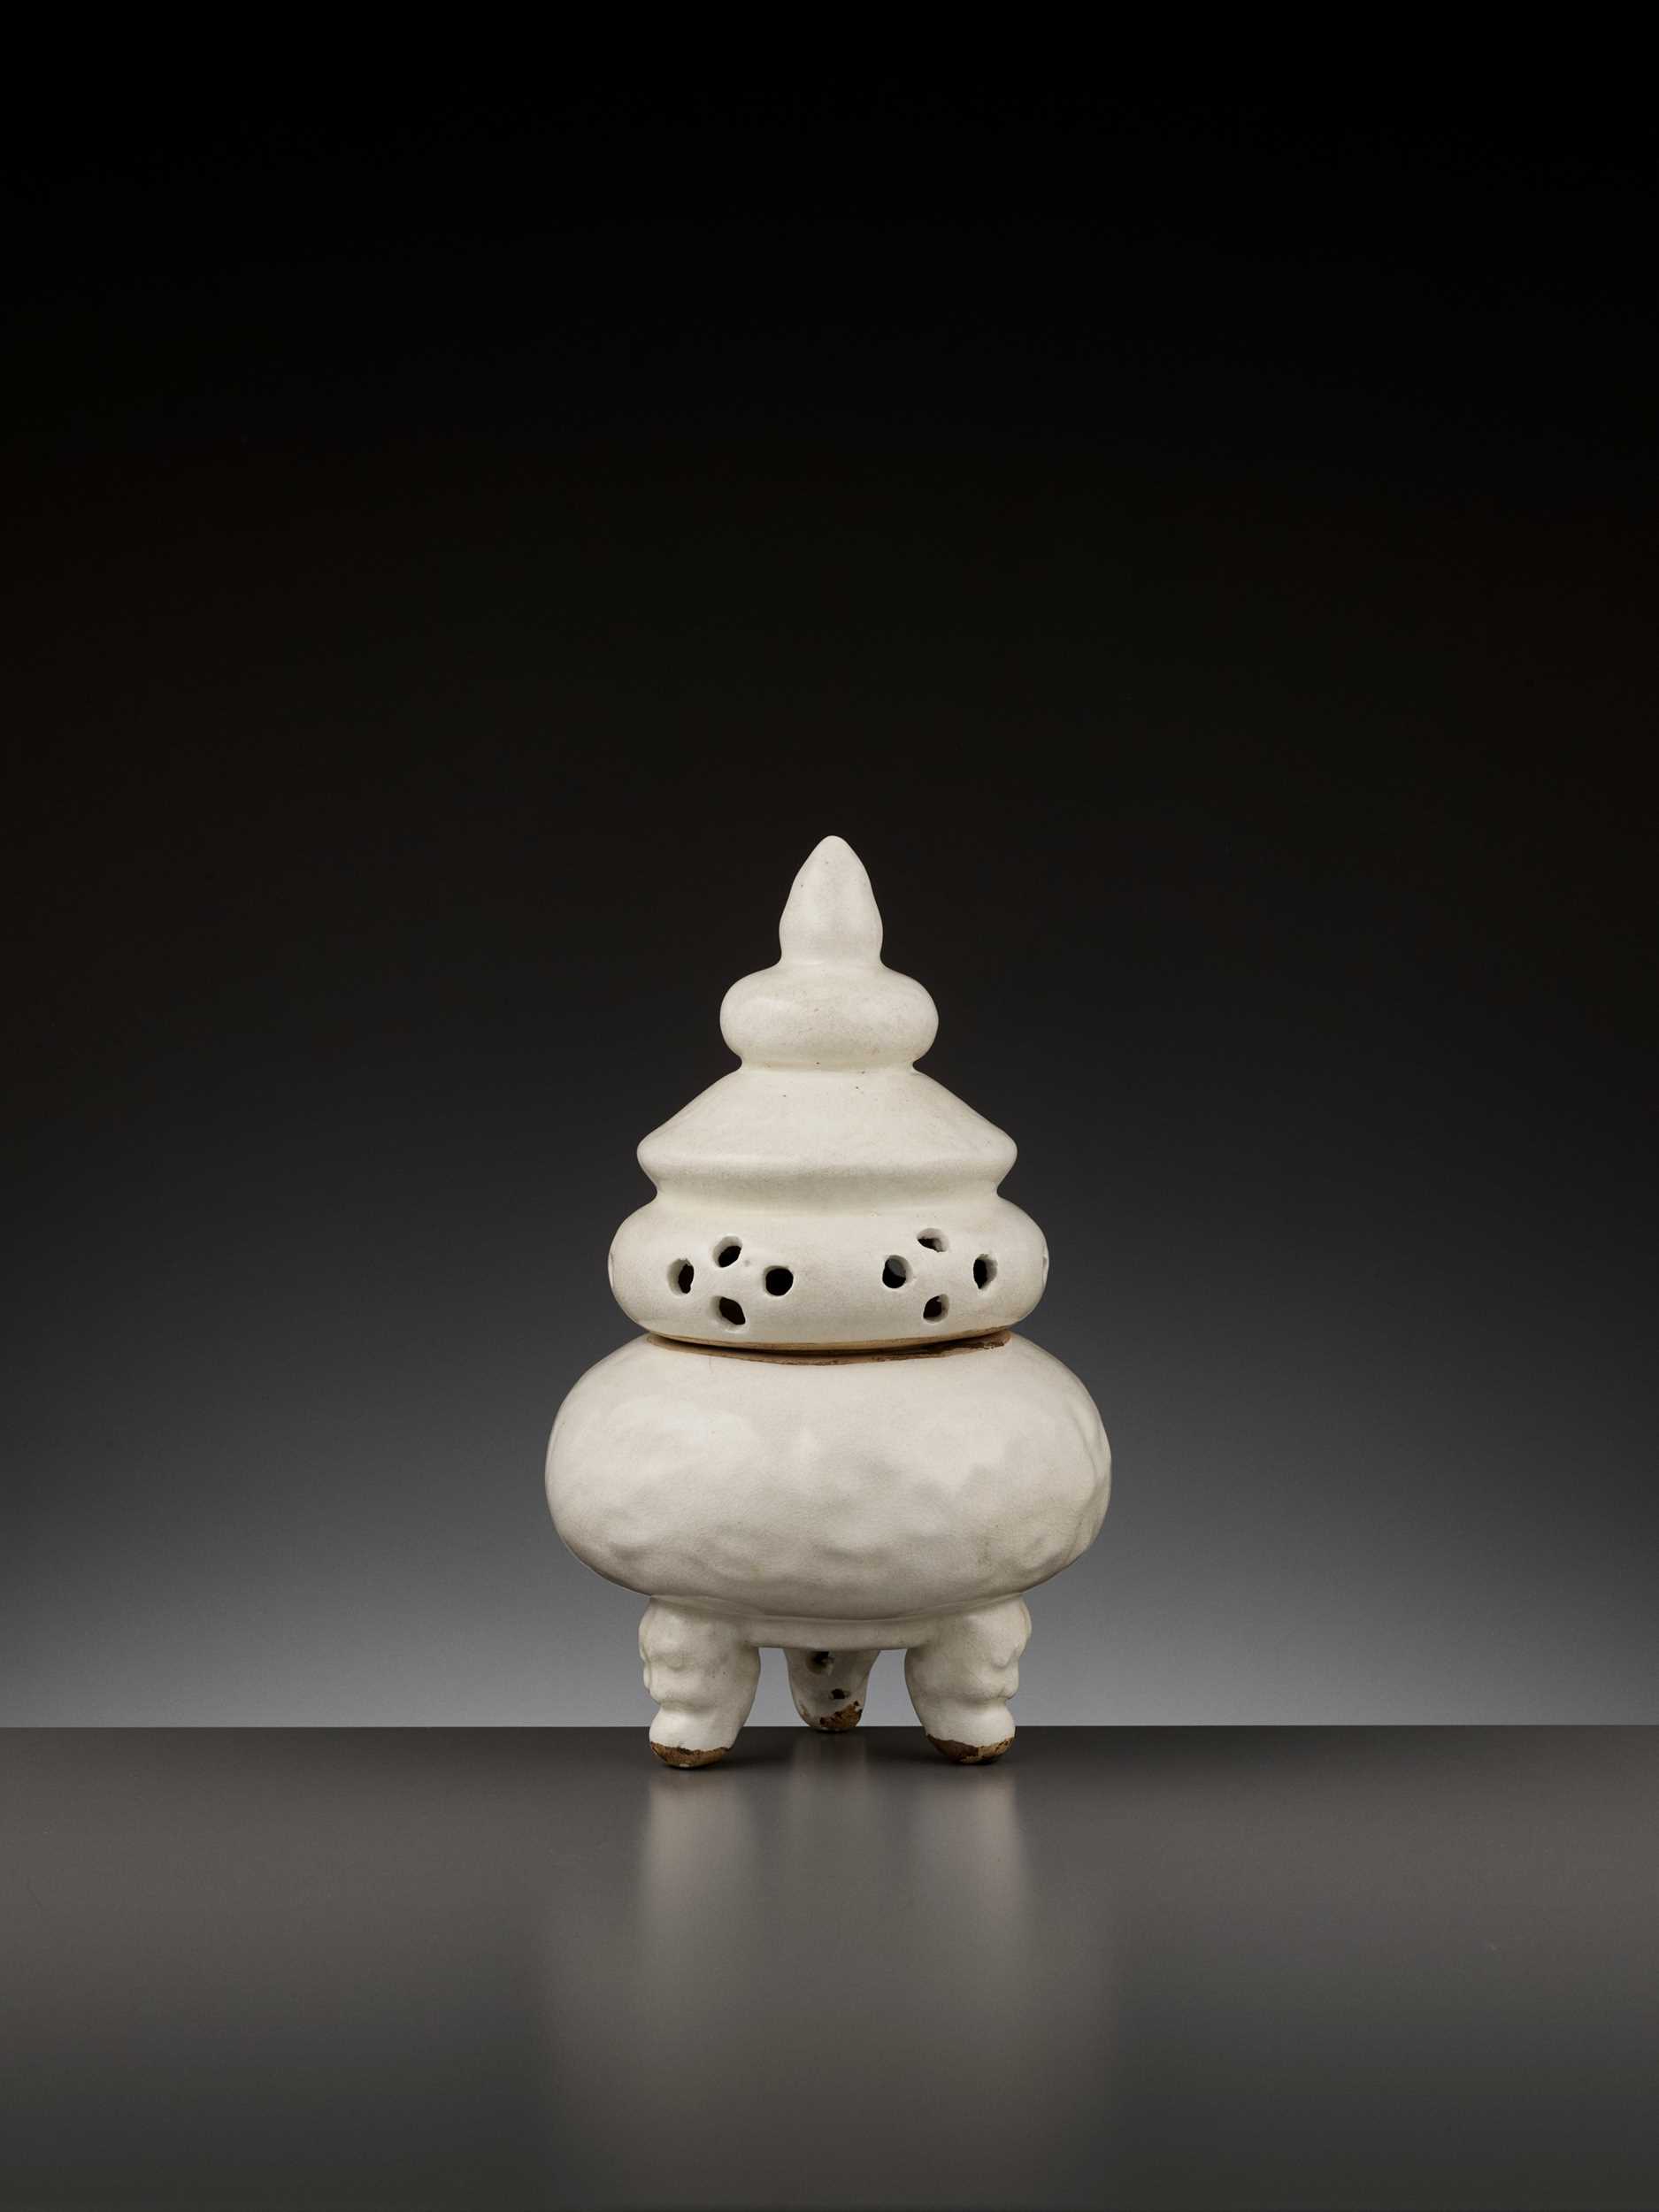 Lot 181 - A RARE WHITE-GLAZED ANHUA-DECORATED INCENSE BURNER AND COVER, LATE SONG TO EARLY MING